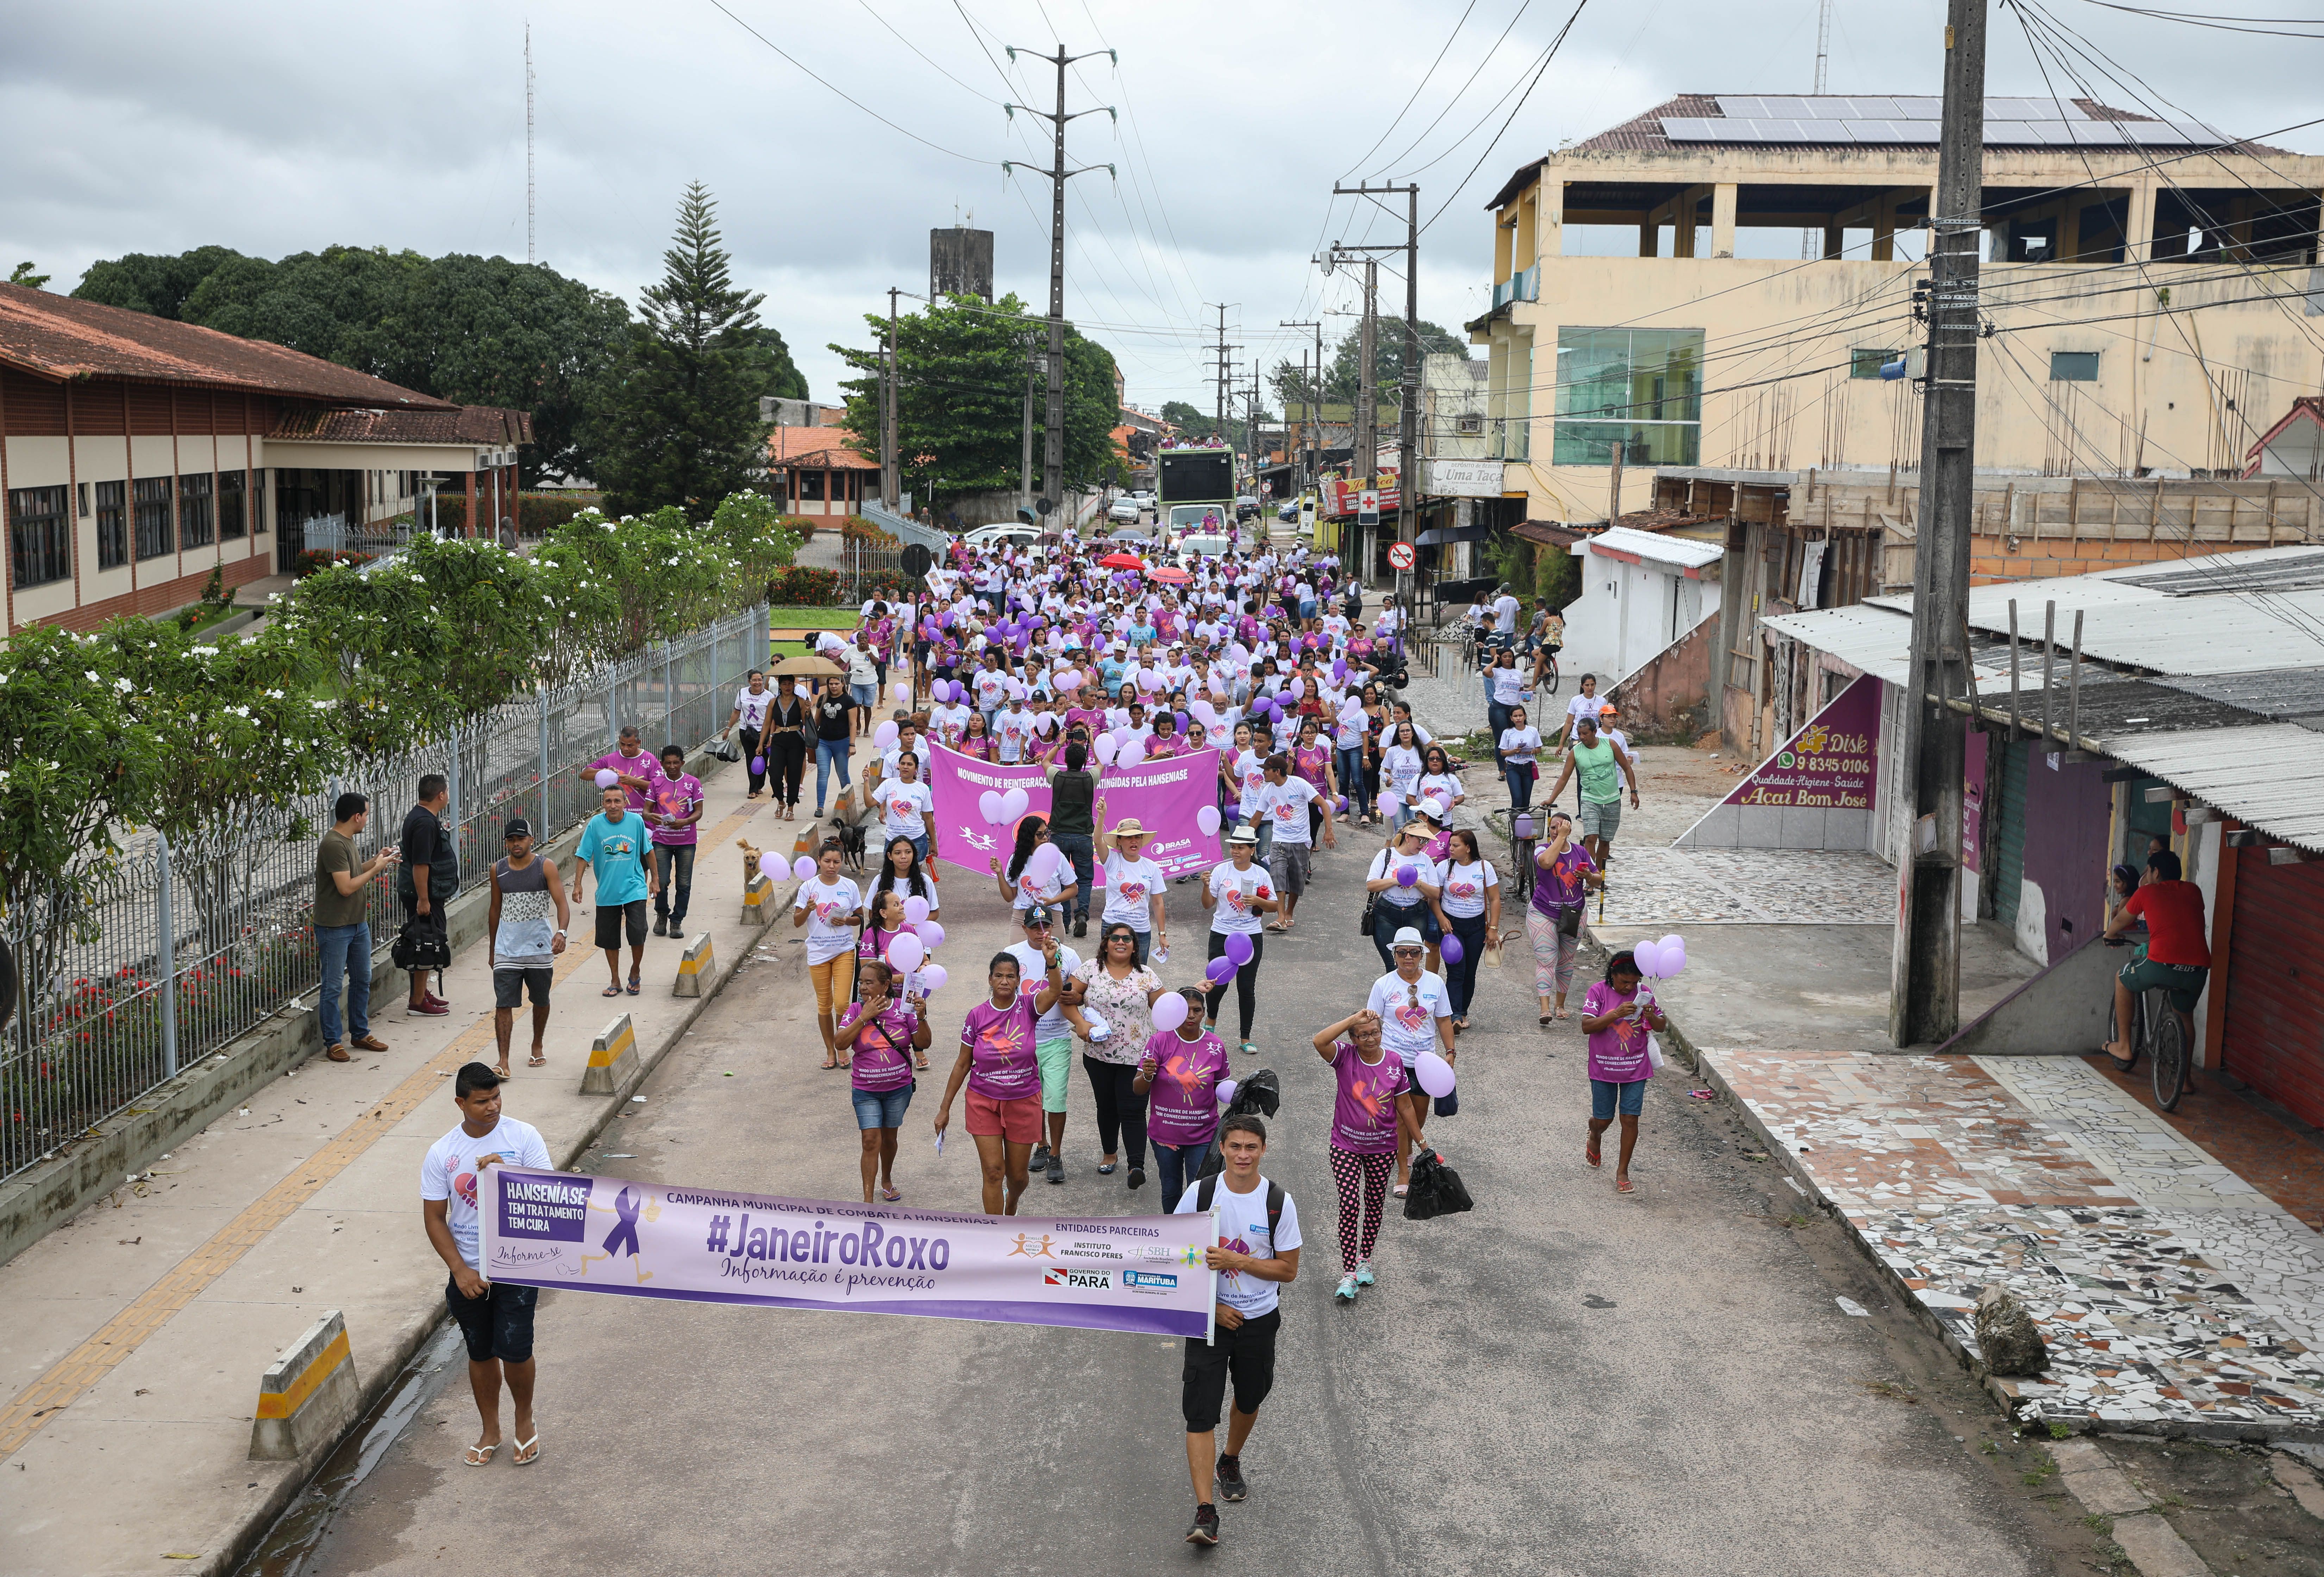 Holding purple posters, waving purple balloons and wearing purple shirts, more than a hundred people participated in a march during “Purple January,” a month-long leprosy awareness campaign. Image by Anton L. Delgado. Brazil, 2020.